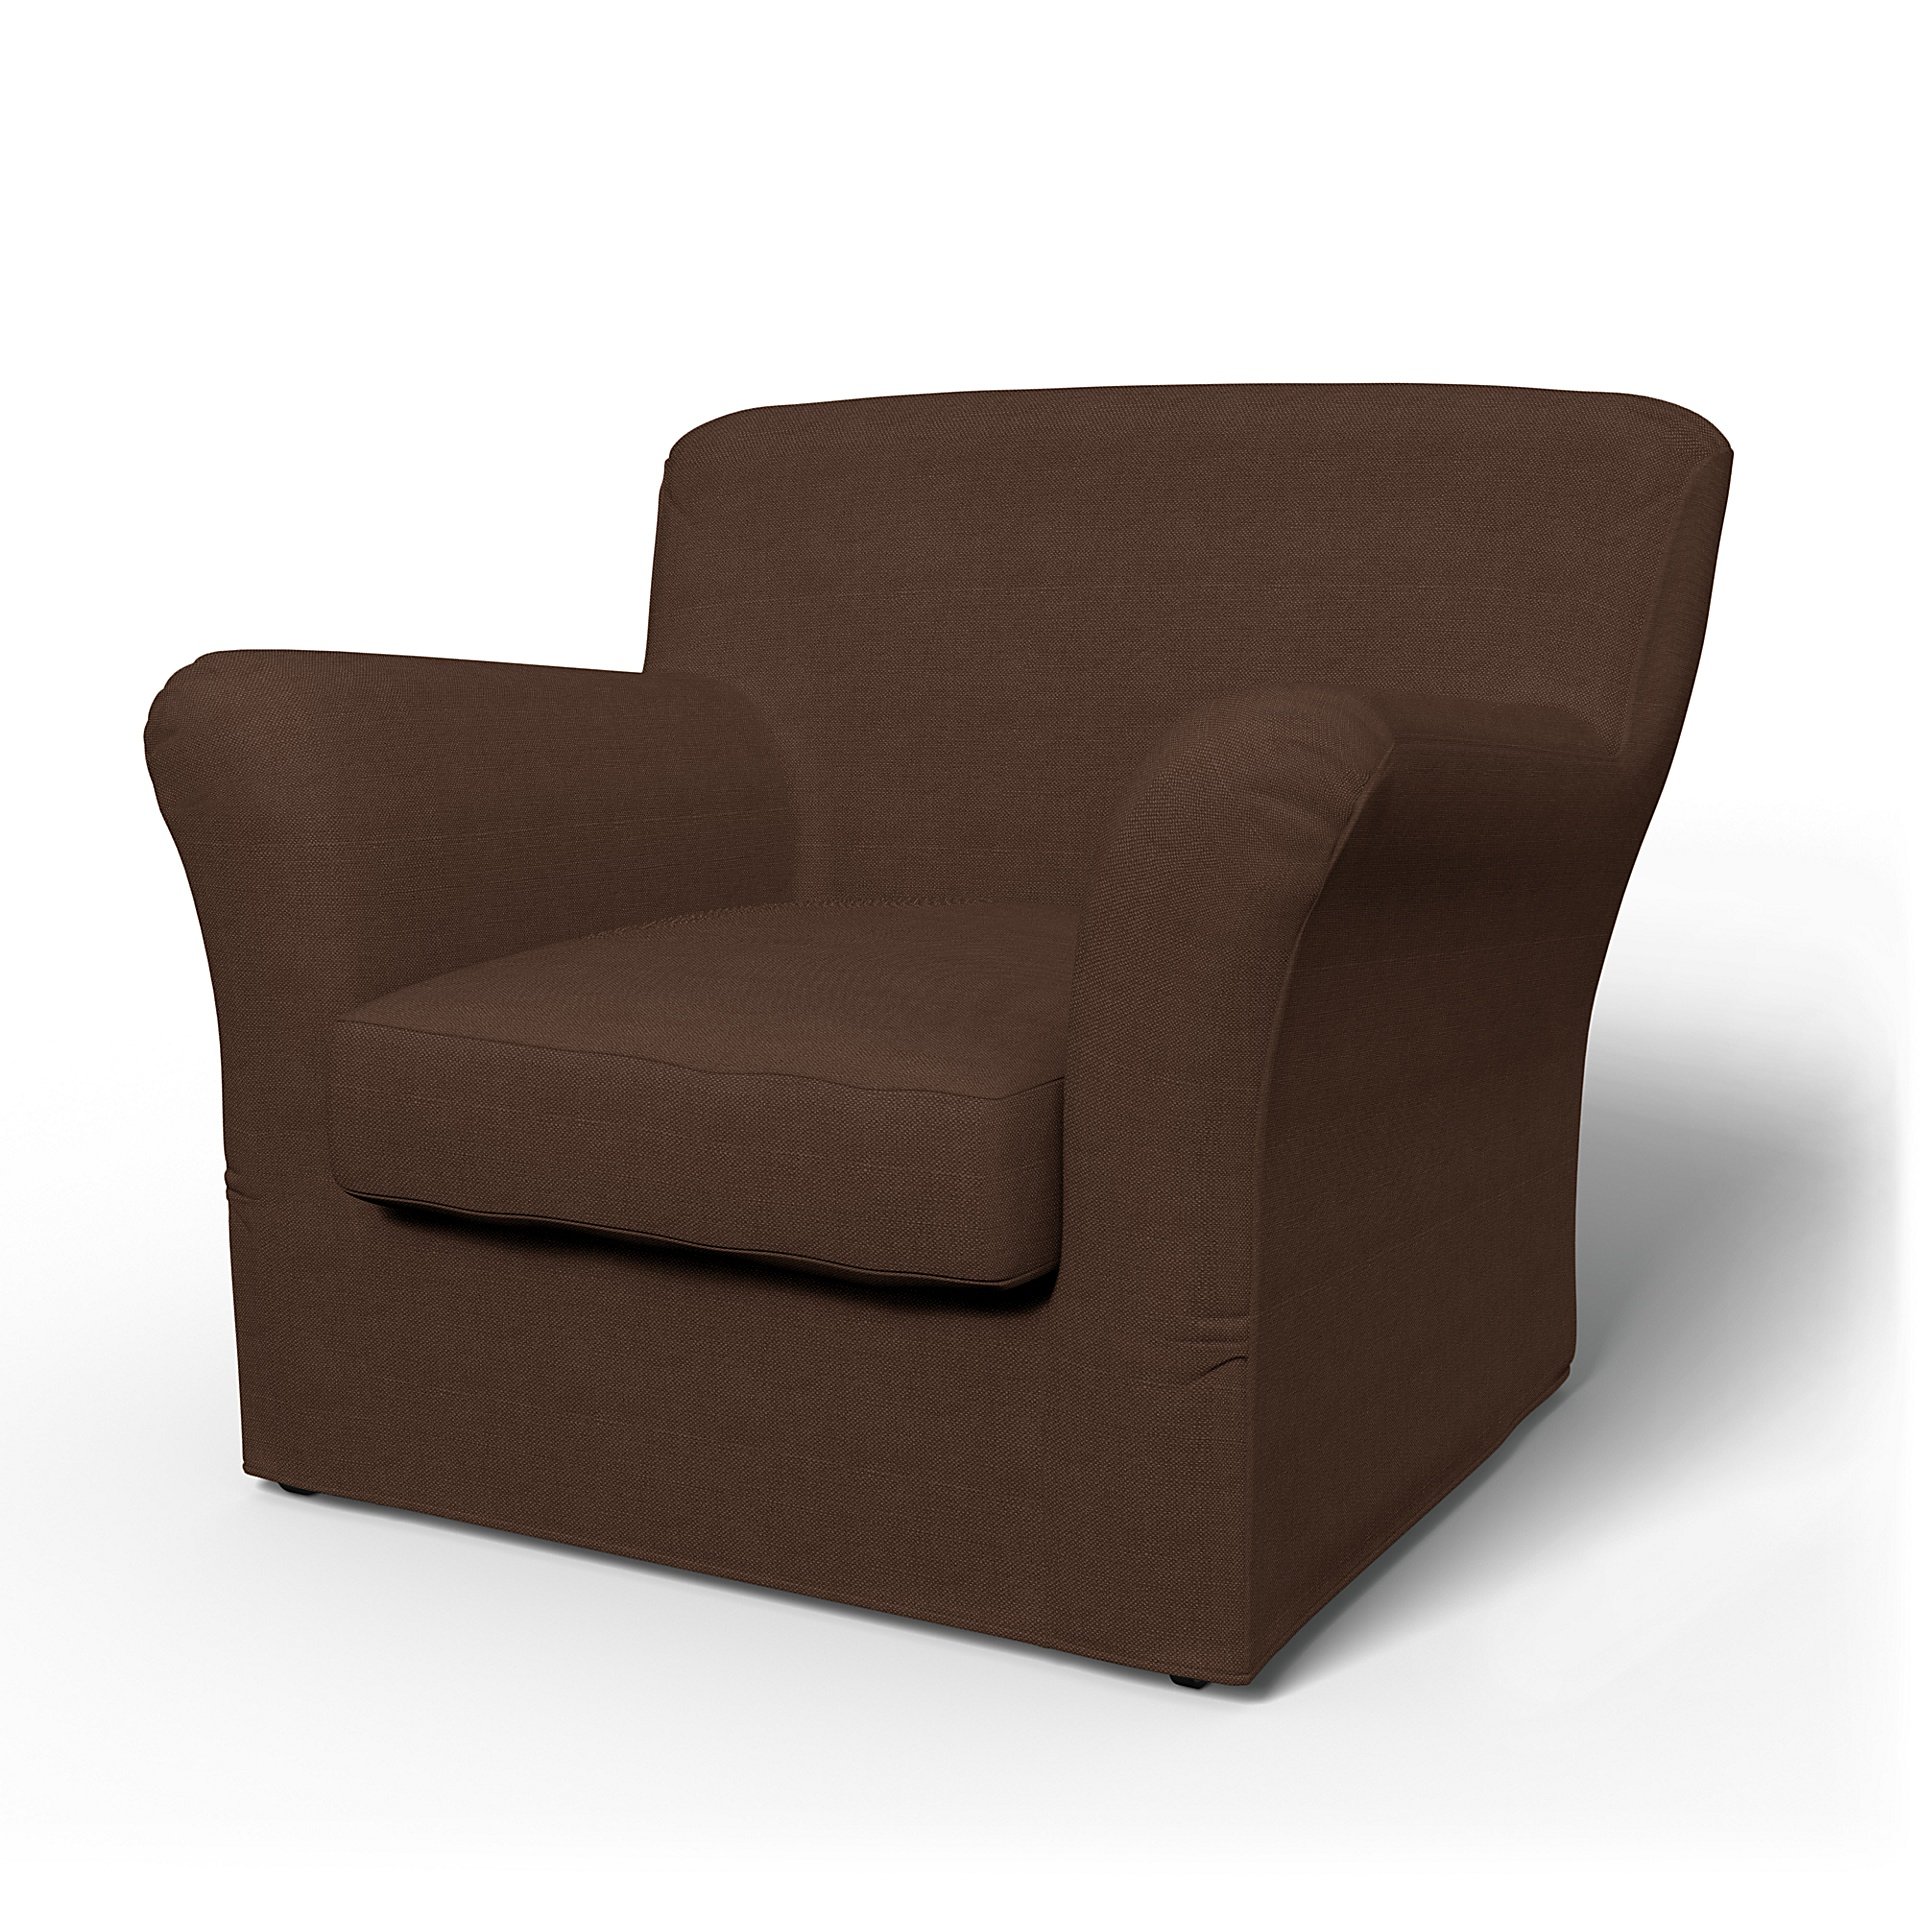 IKEA - Tomelilla Low Back Armchair Cover (Small), Chocolate, Linen - Bemz